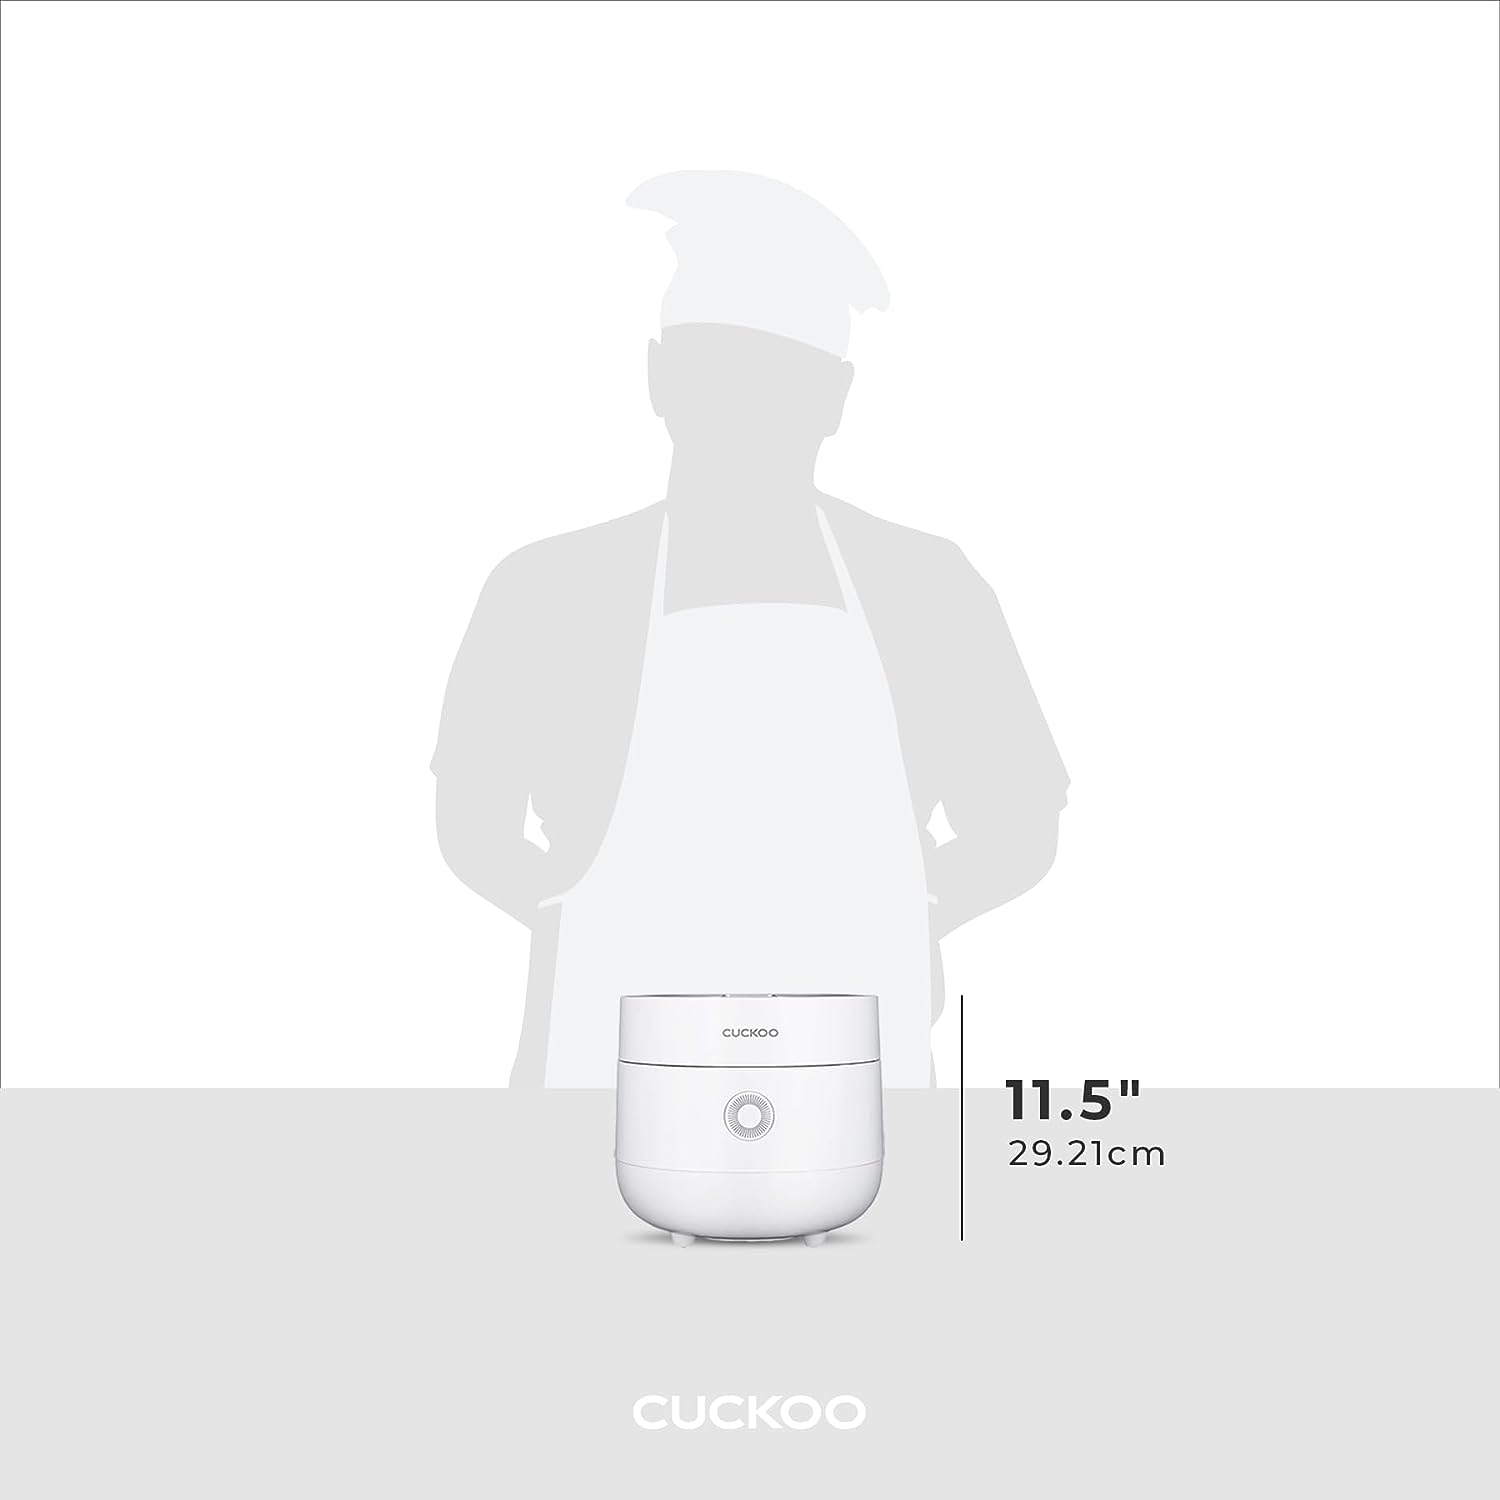 Cuckoo CR-0675F | 6-Cup (Uncooked) Micom Rice Cooker | 13 Menu Options: Quinoa, Oatmeal, Brown Rice & More, Touch-Screen, Nonstick Inner Pot | Gray